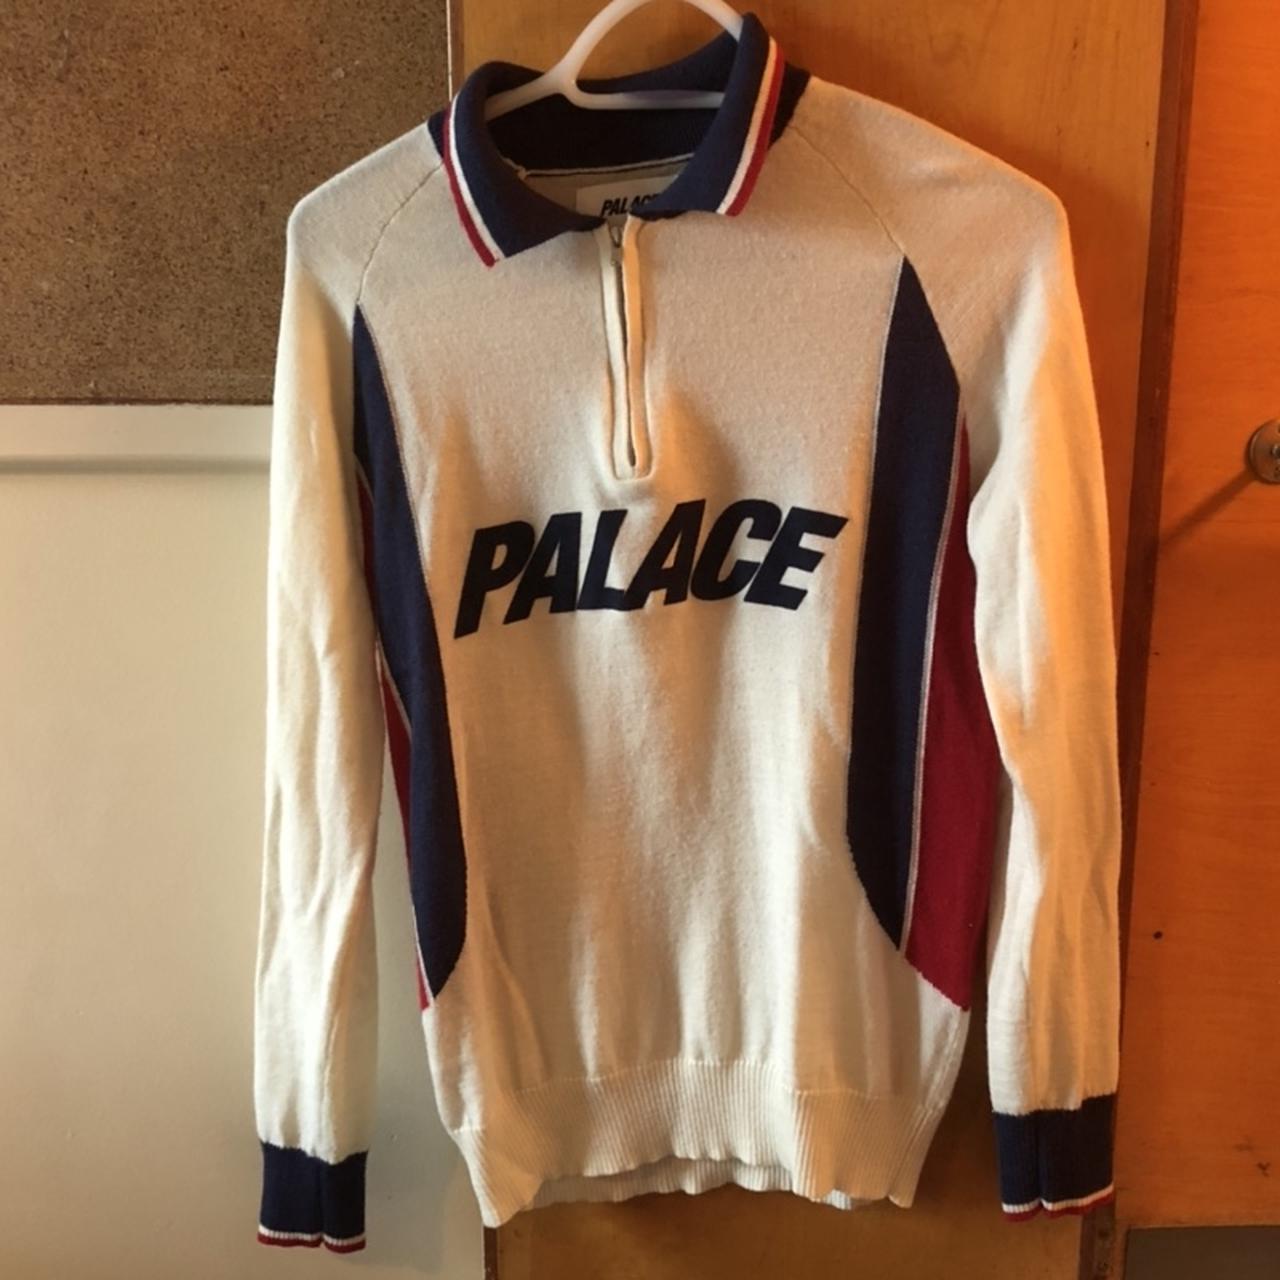 Palace 1/4 zip Polo zip knit white from ultimo - Depop